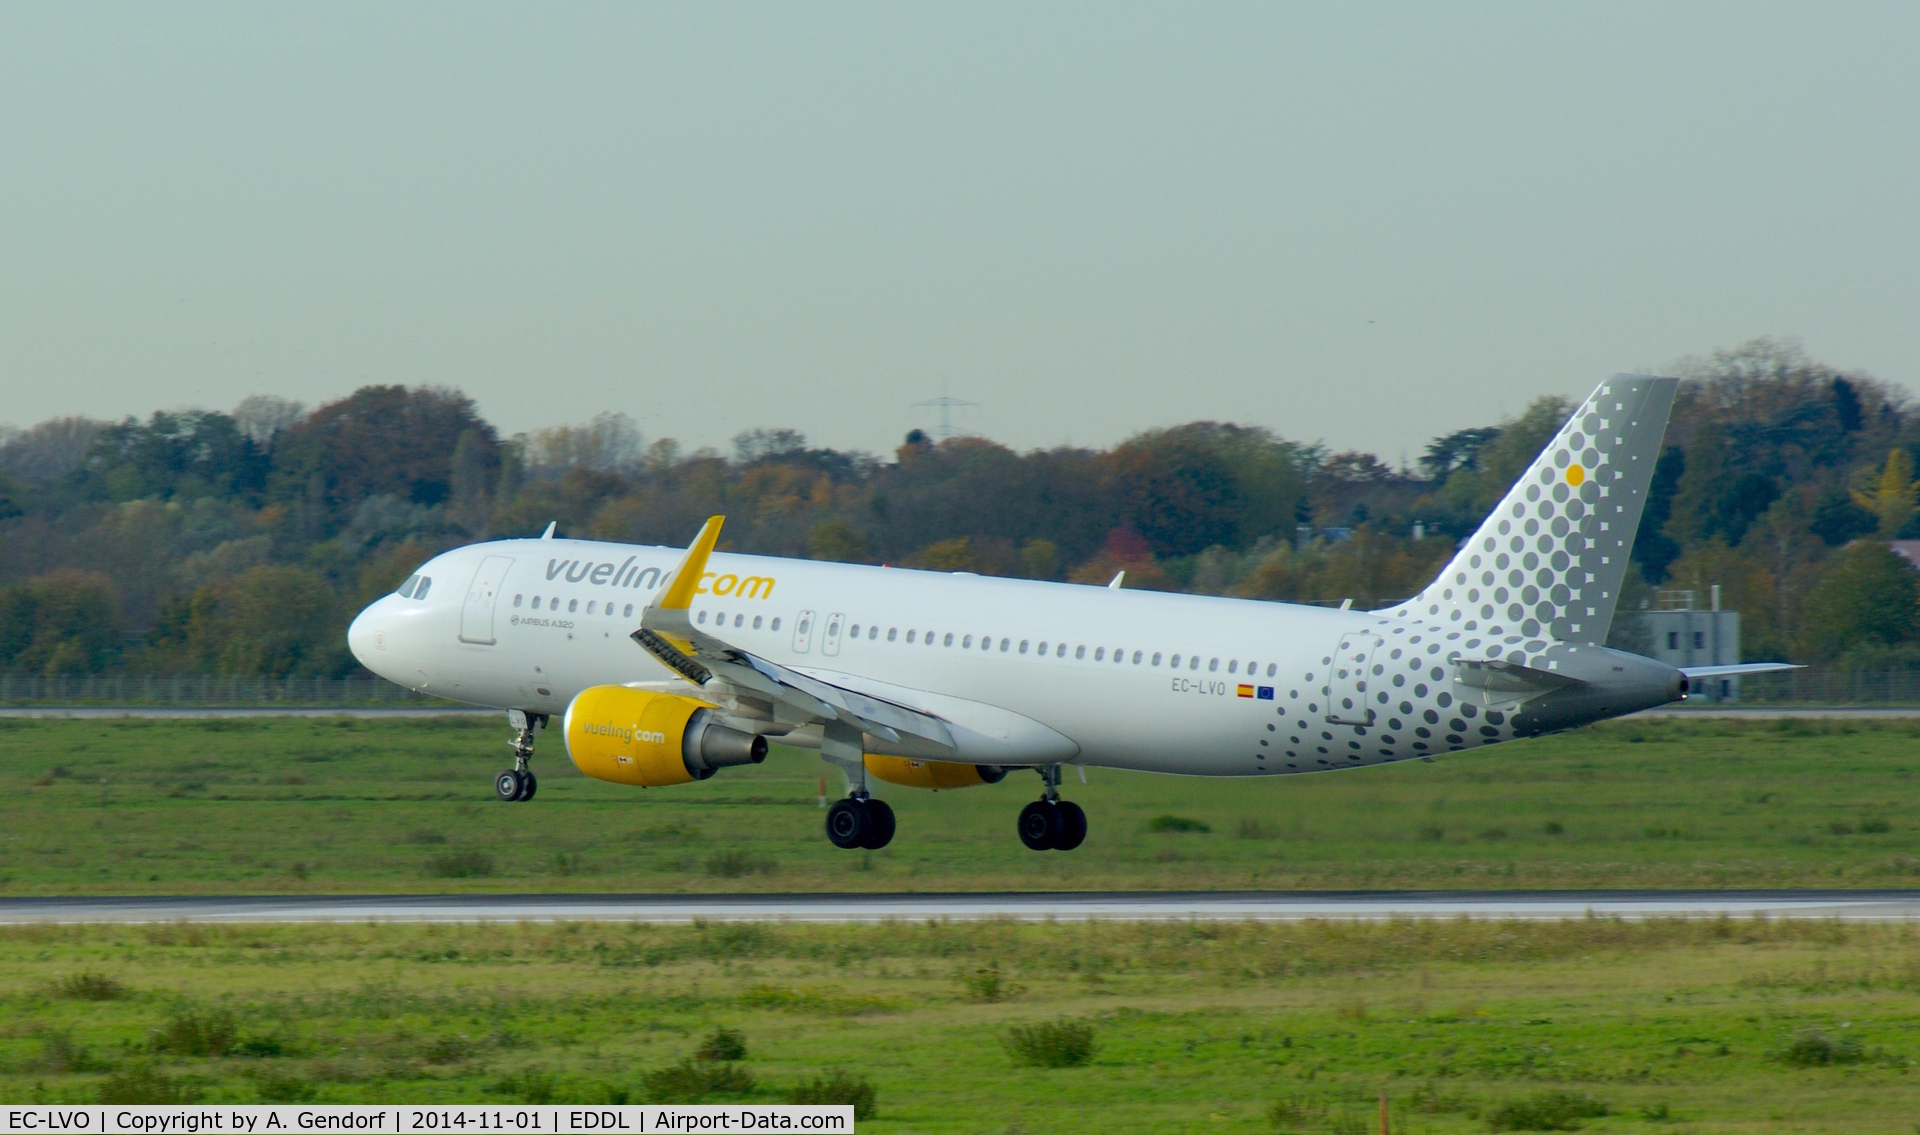 EC-LVO, 2013 Airbus A320-214 C/N 5533, Vueling Airlines, seen here smoothly touching down at Düsseldorf Int'l(EDDL)